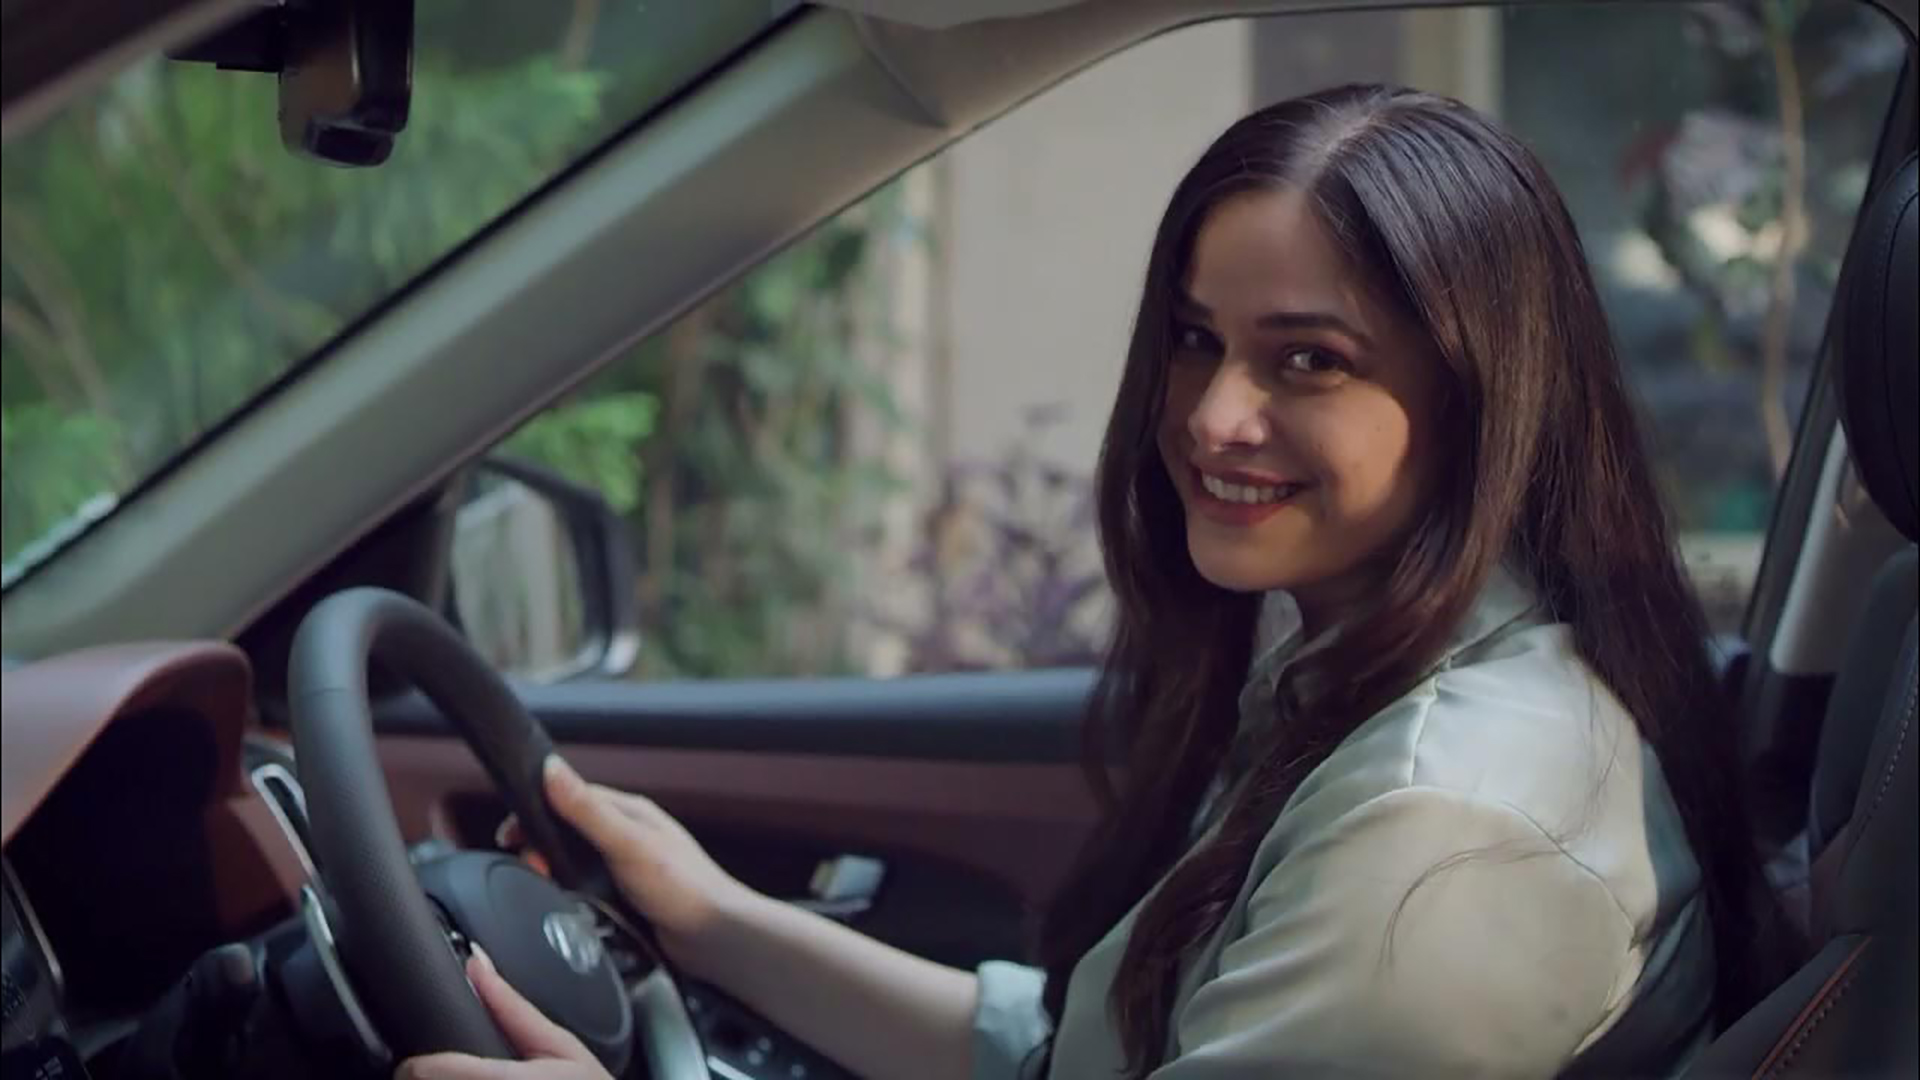 Our Alumni Diksha feature in the latest commercial by Tizen